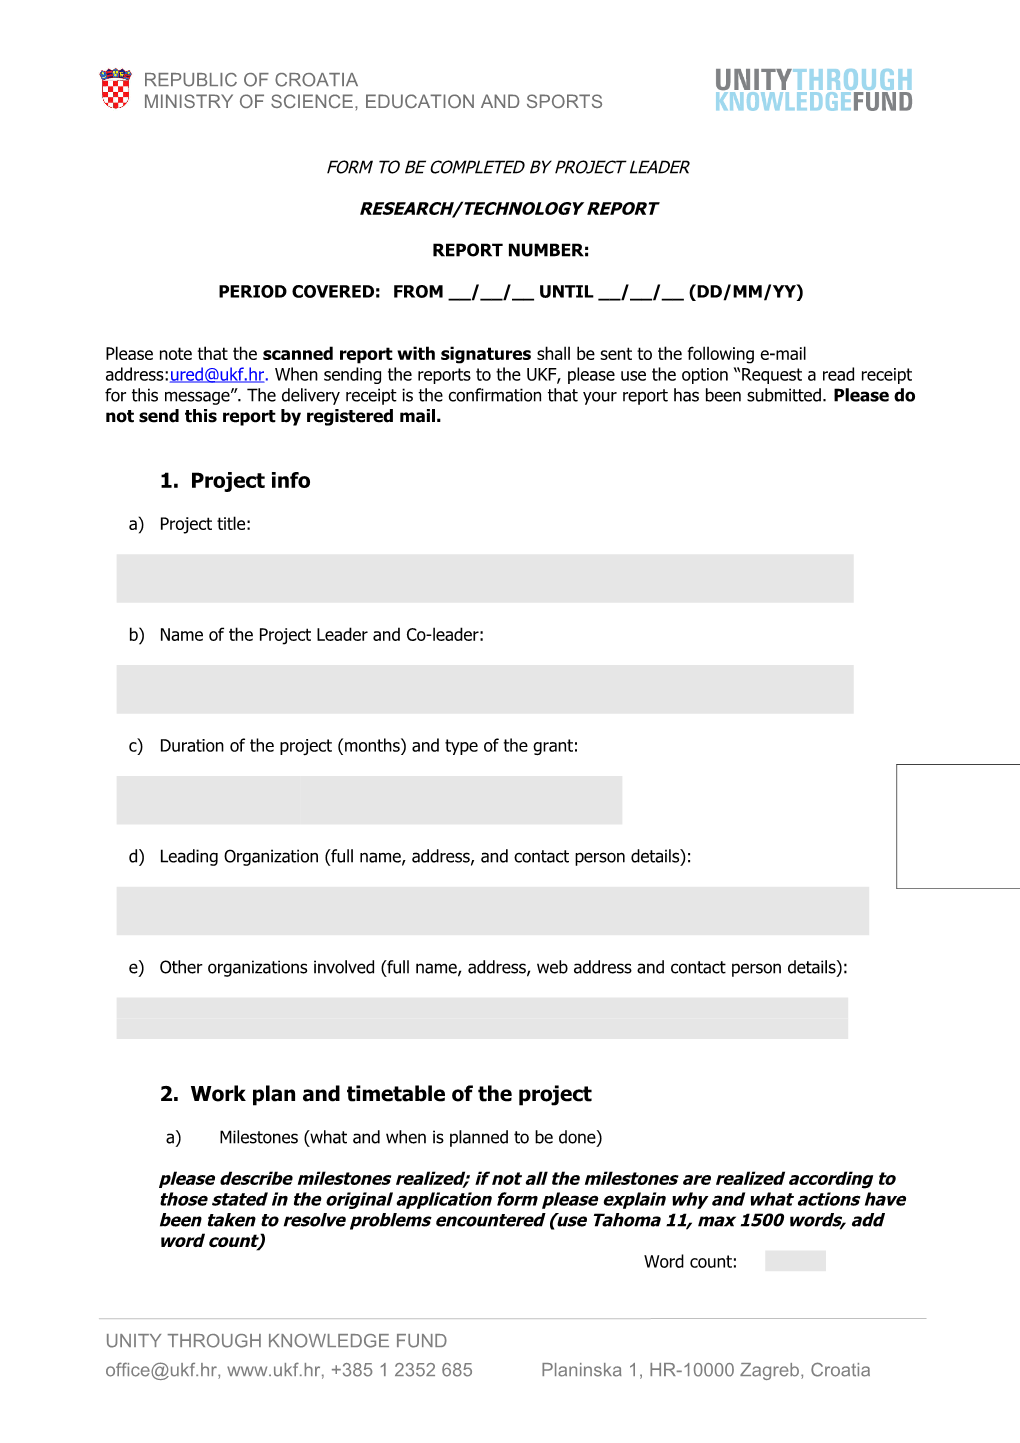 Form to Be Completed by Project Leader